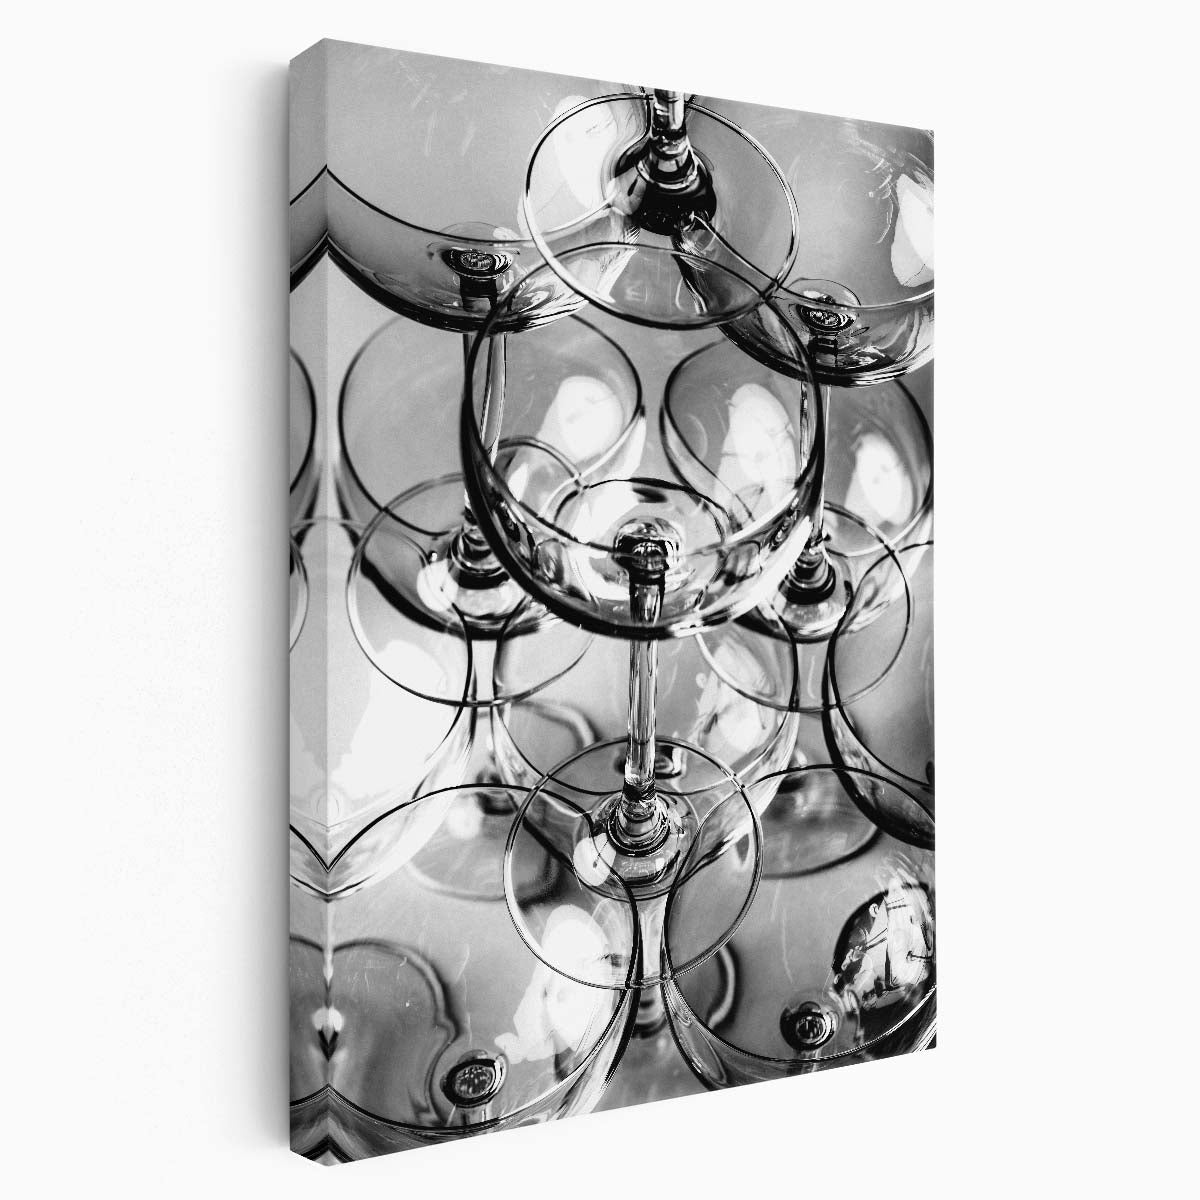 Monochrome Champagne Tower Photography - Abstract Cocktail Bar Art by Luxuriance Designs, made in USA